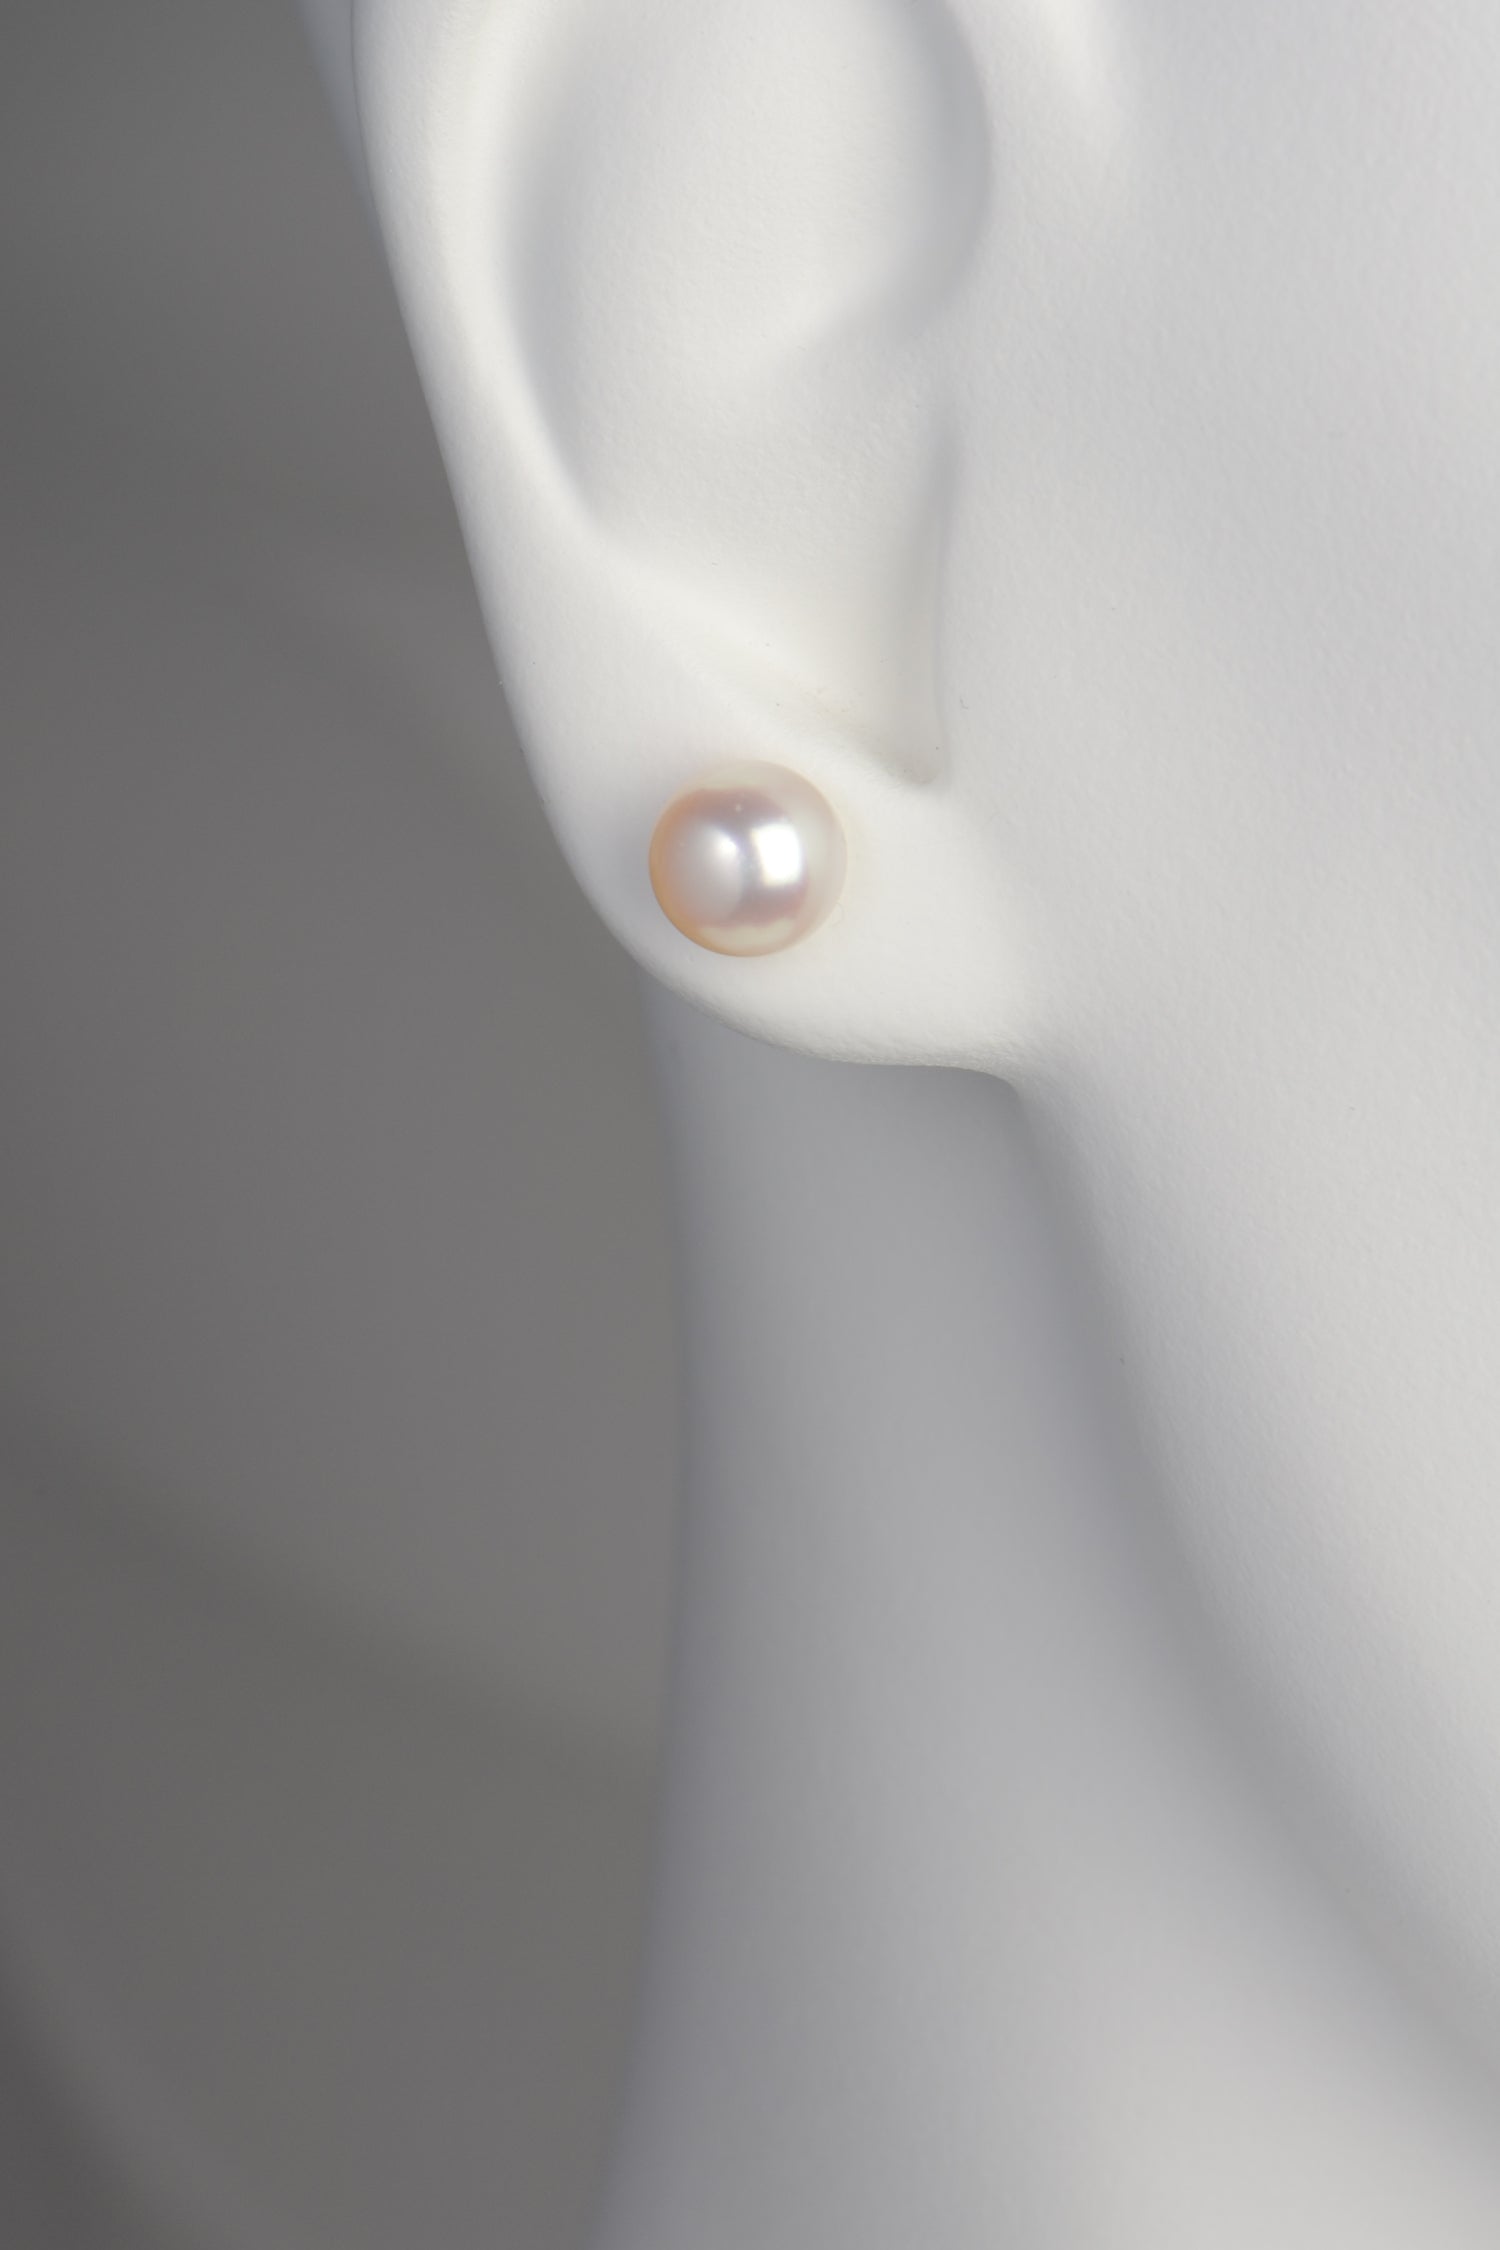 white cultured pearl stud earrings with gold posts and backs